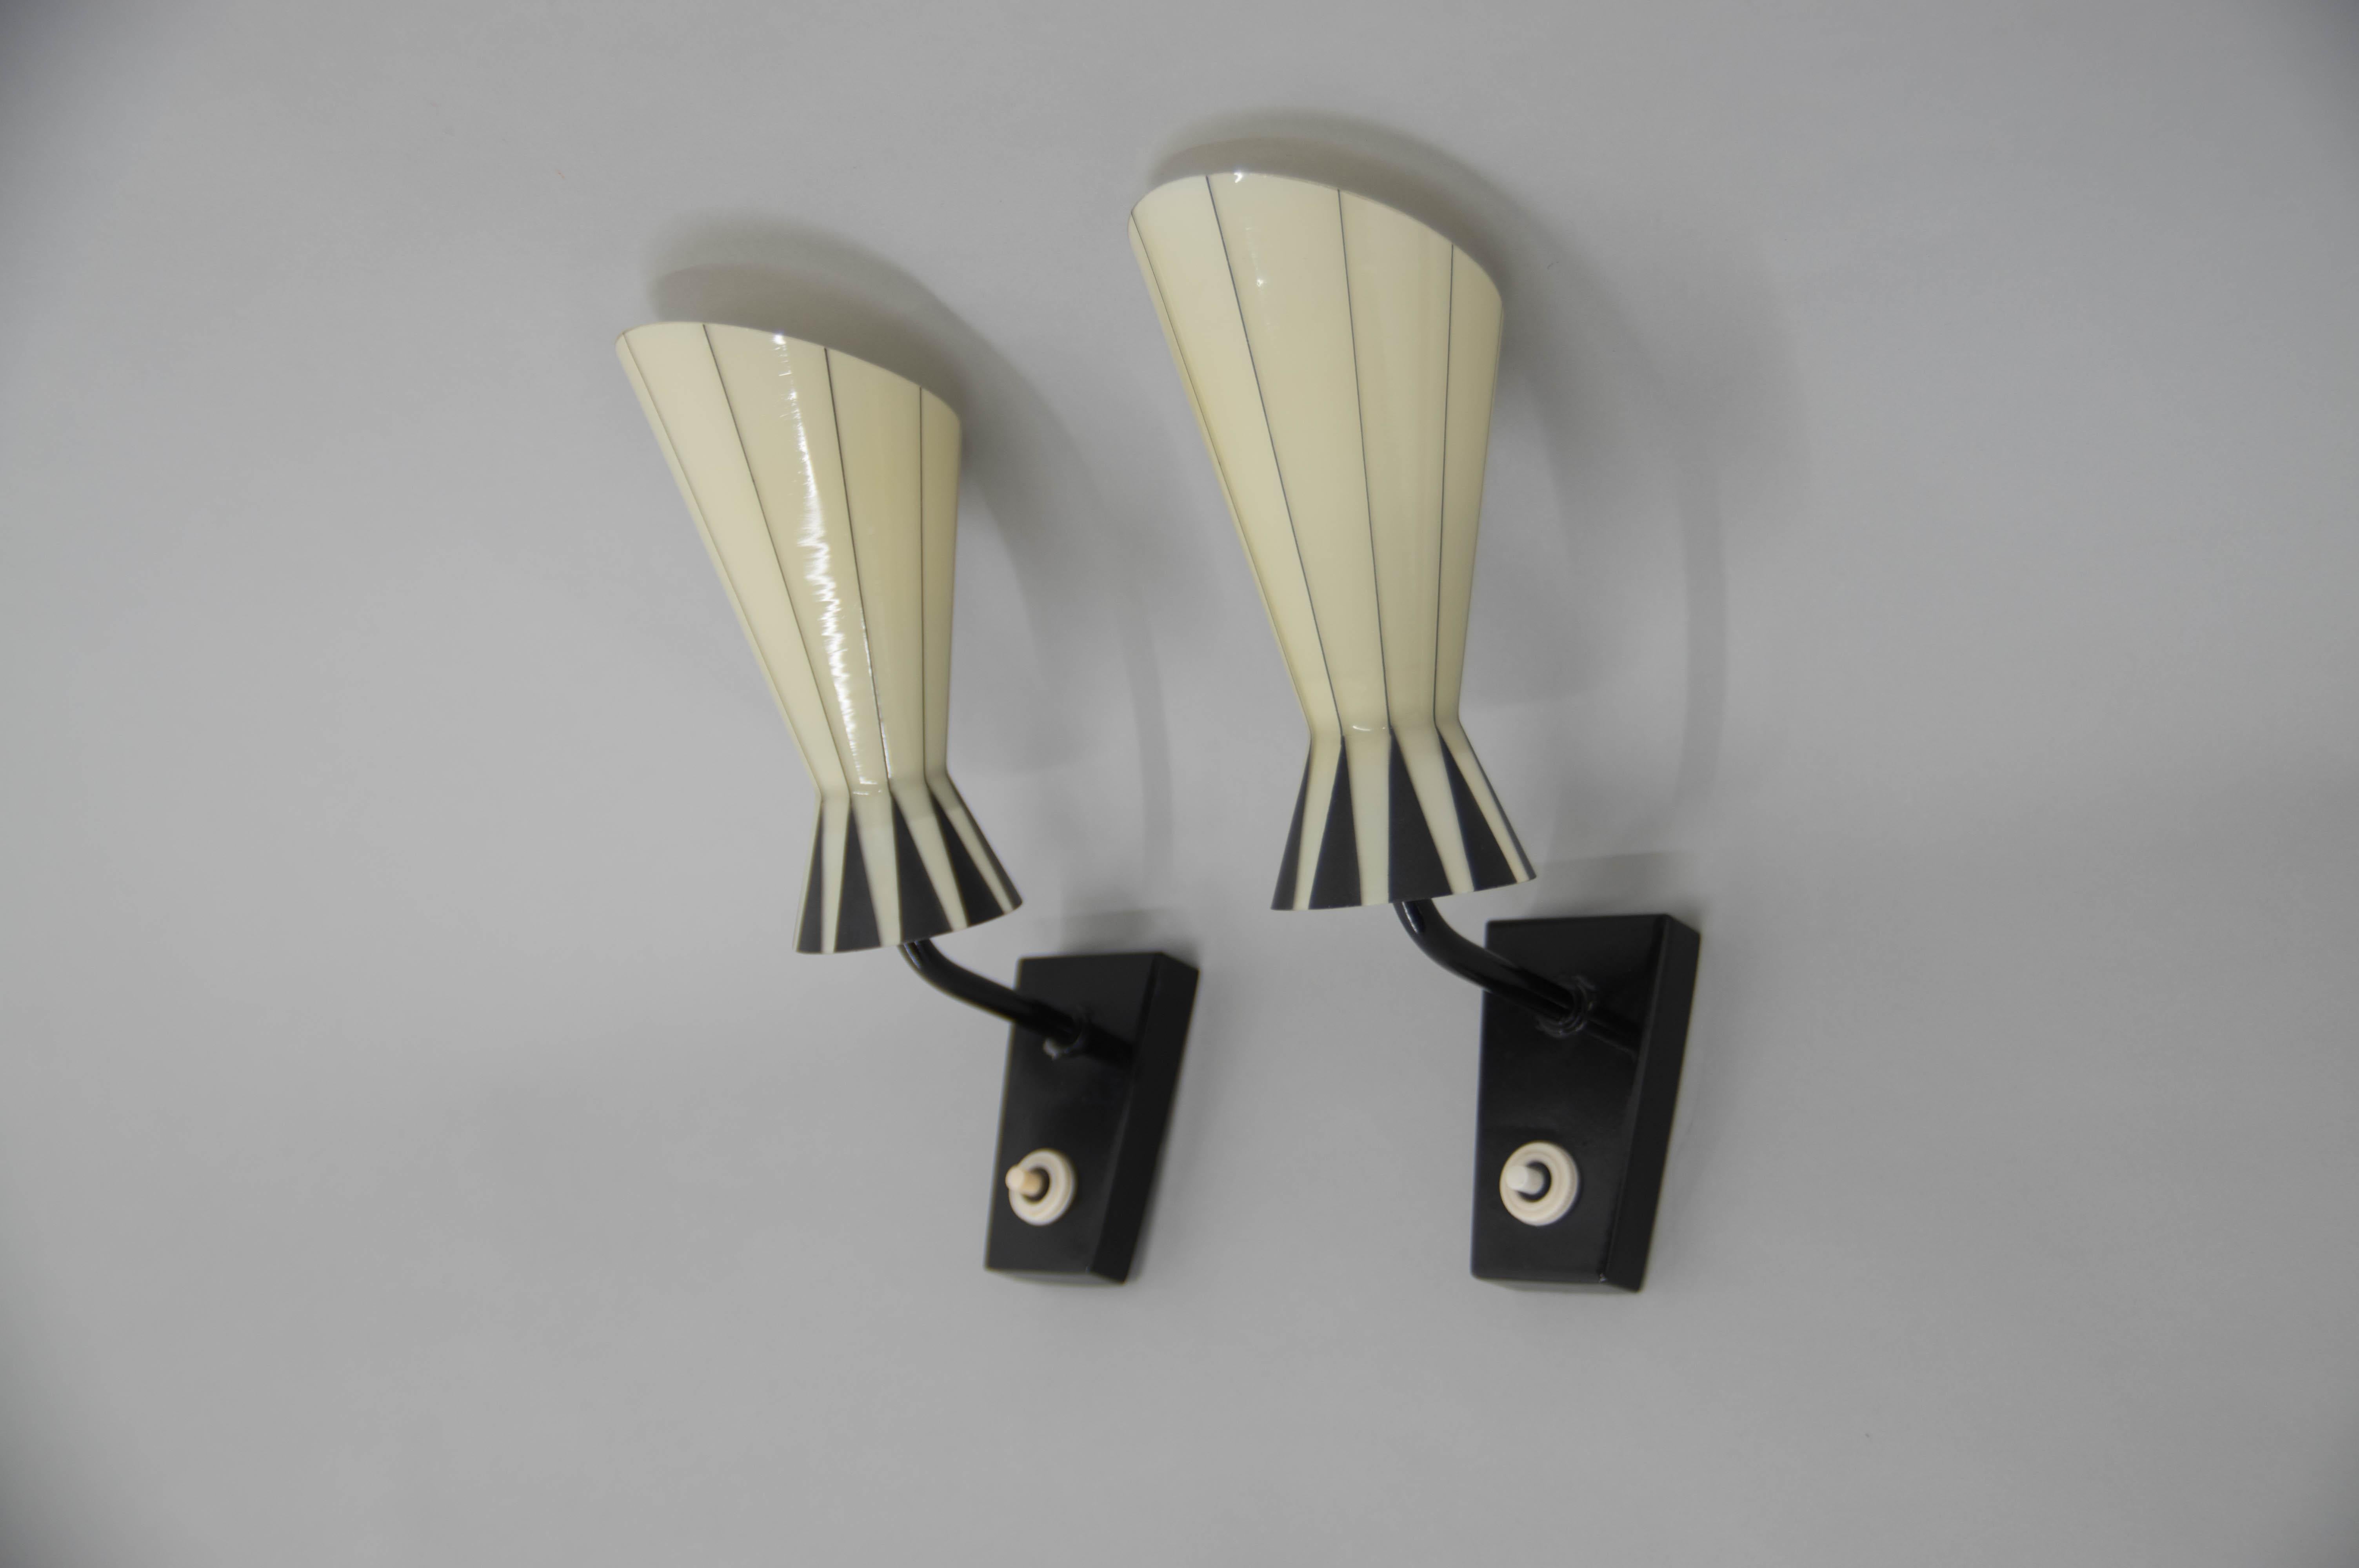 Beautiful pair of Art Deco style wall lamps.
Very good original condition.
1x40W, E12-E14 bulb
US wiring compatible